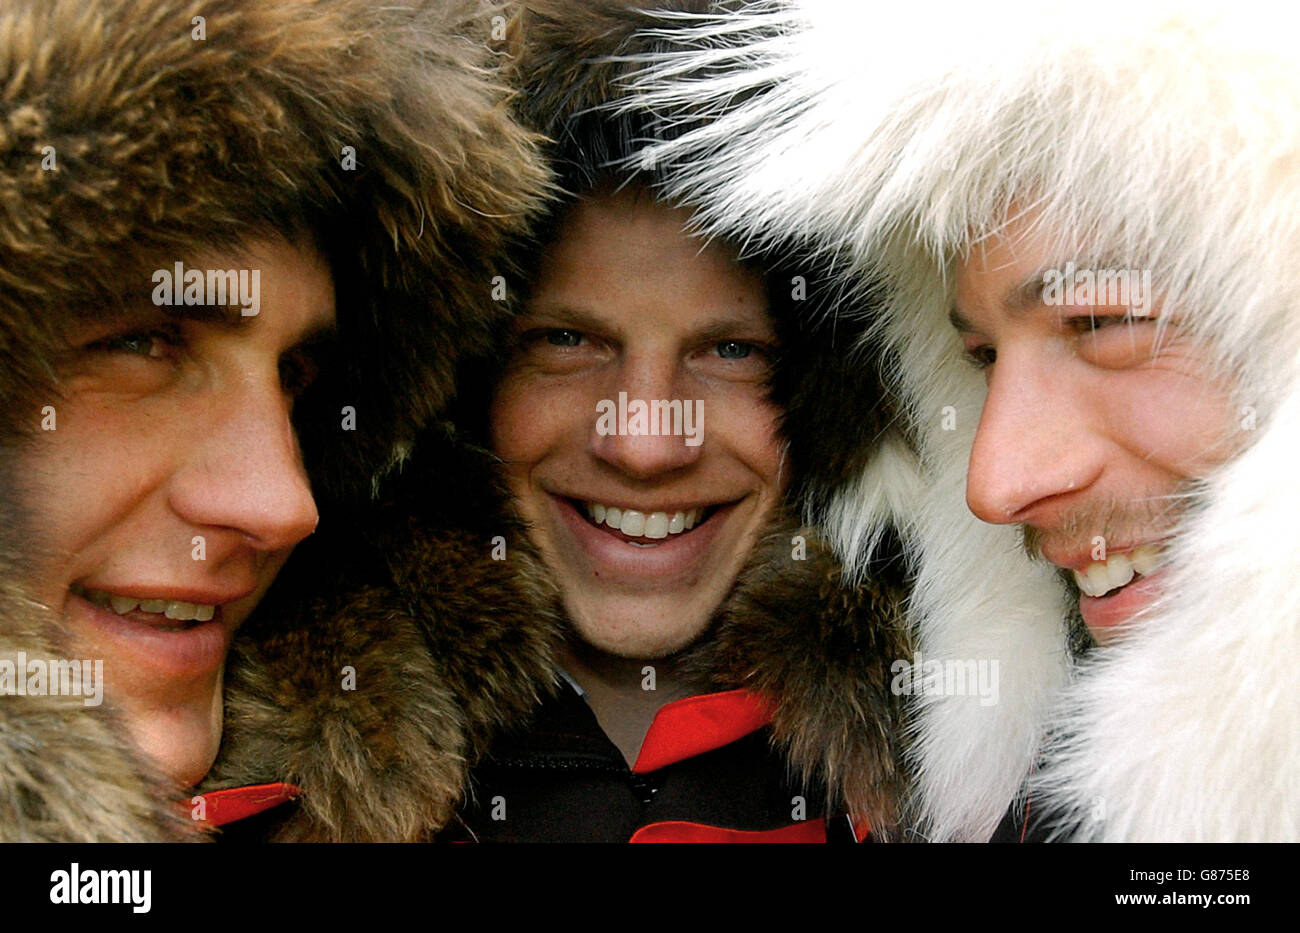 Tom Avery, 29, of Ticehurst, East Sussex, huddles with team-mates Andrew Gerber (left) and George Wells (right) on their return. The British explorers recreated Commander Robert Peary's 1909 expedition, completing the trip in 36 days, 22 hours and 11 minutes. Stock Photo